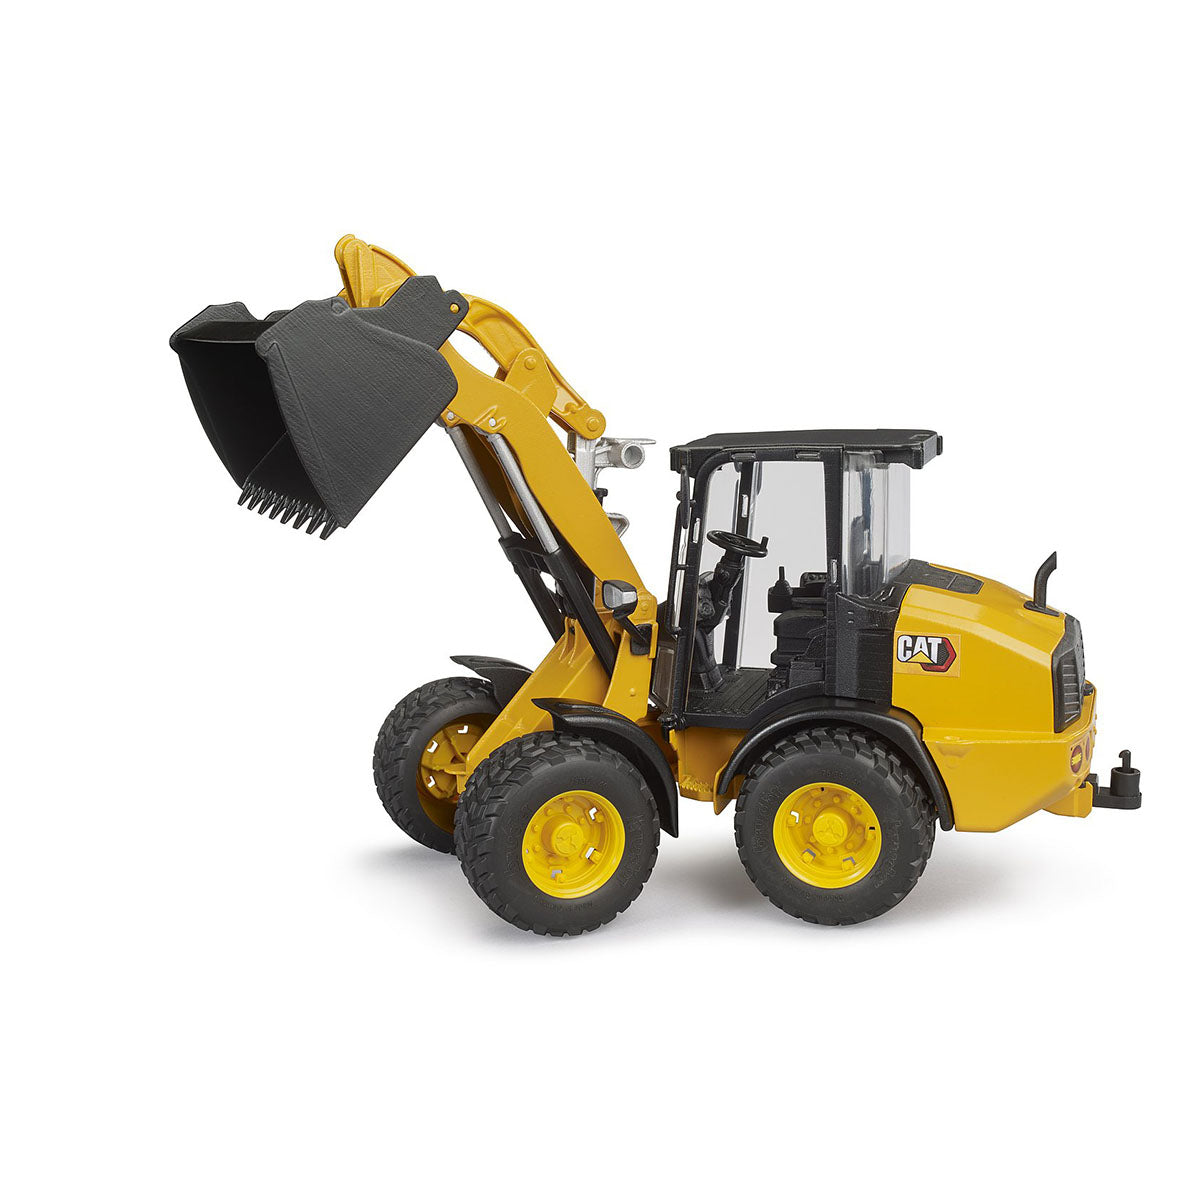 Wheel loader construction CAT brand toy with loading arm raised by Bruder.